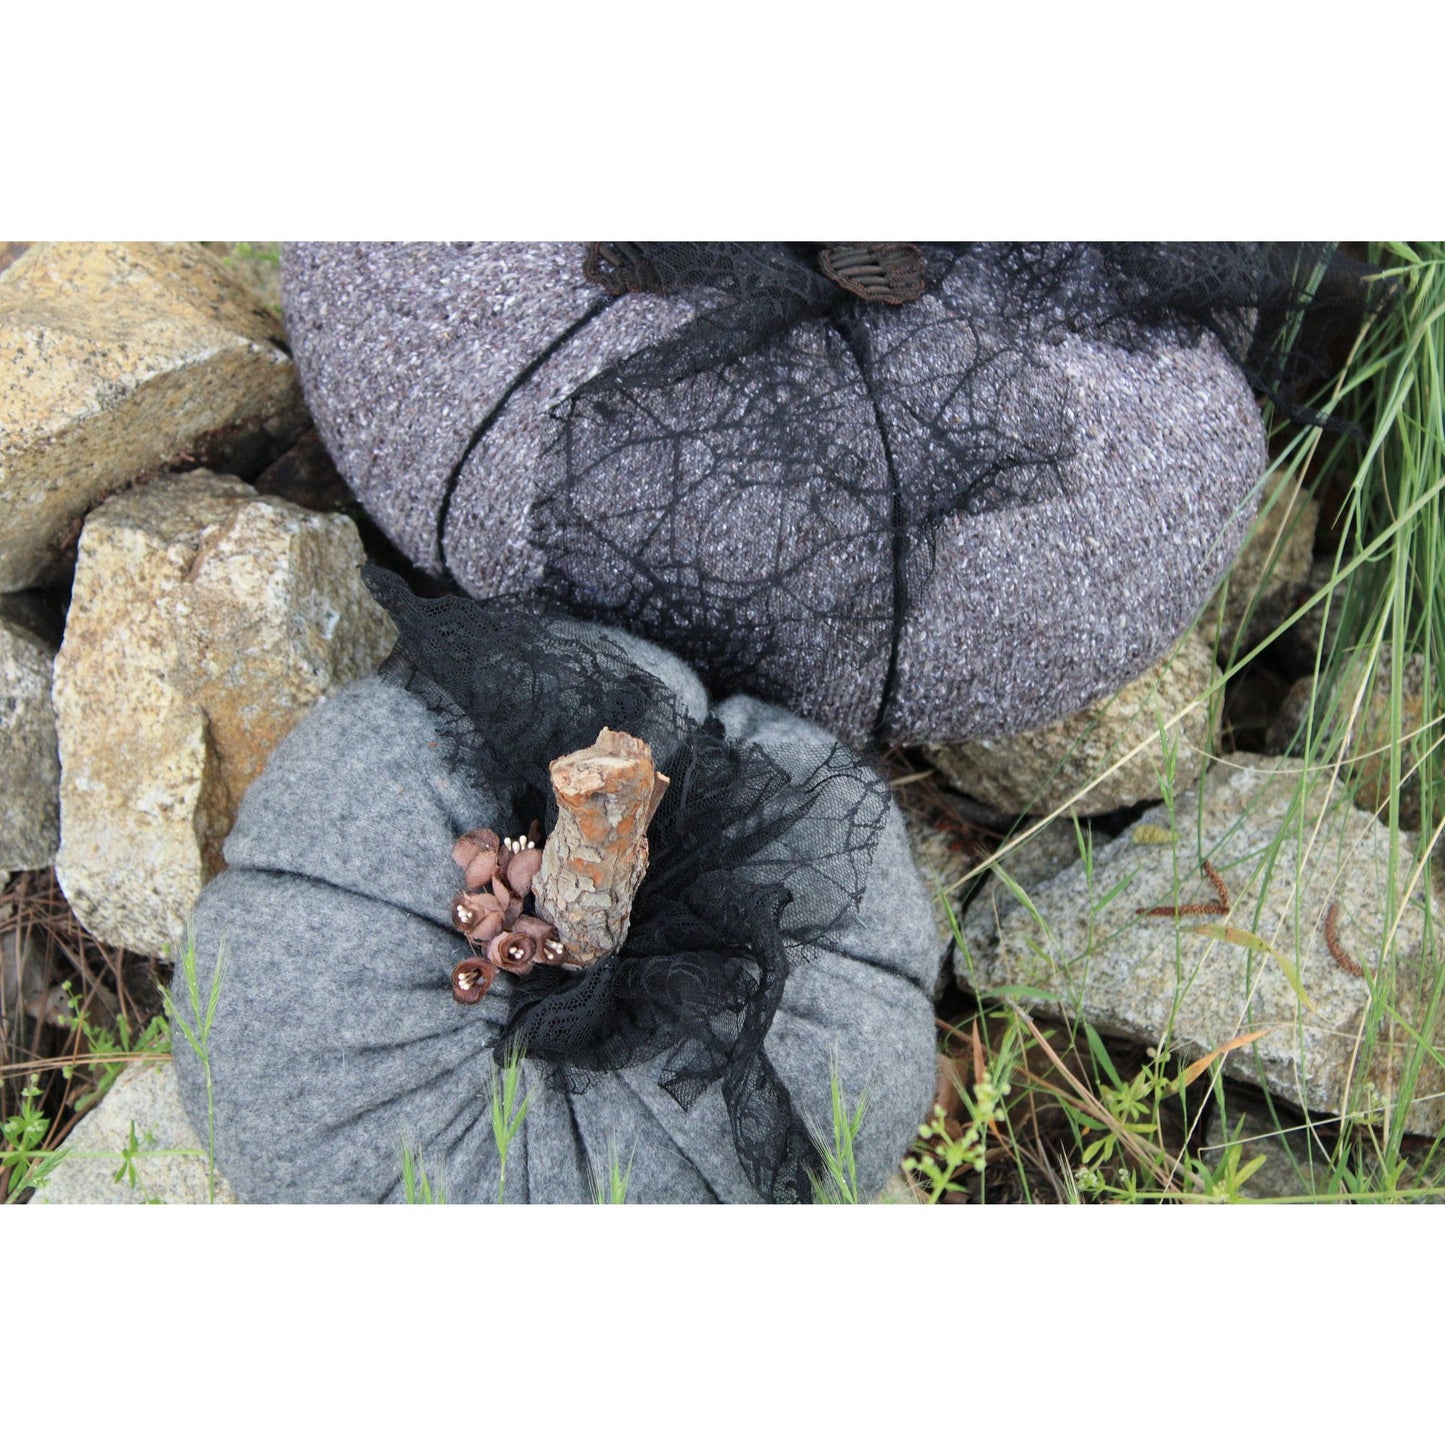 Knit Gray Cashmere Pumpkin Pillow With Black Lace, Flowers and a Stick Stem